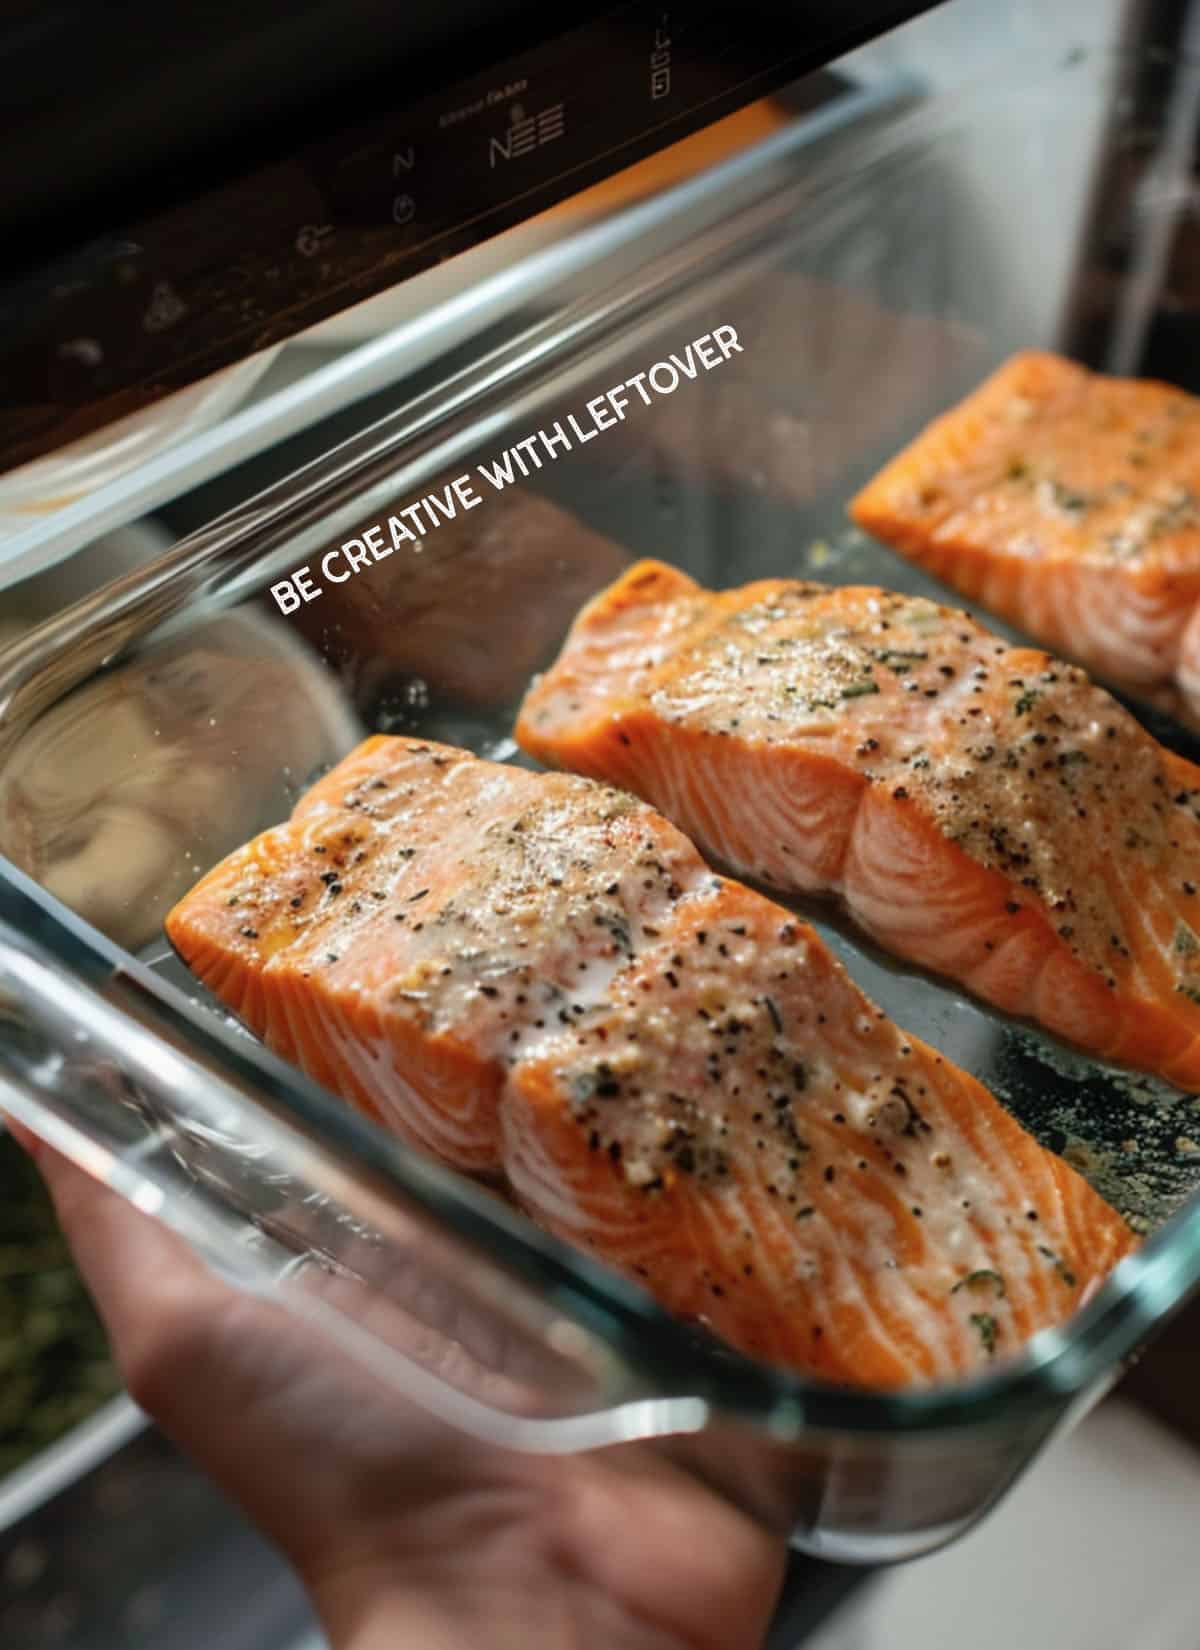 Your leftover salmon deserves a second chance! Don't toss it – transform it into something amazing